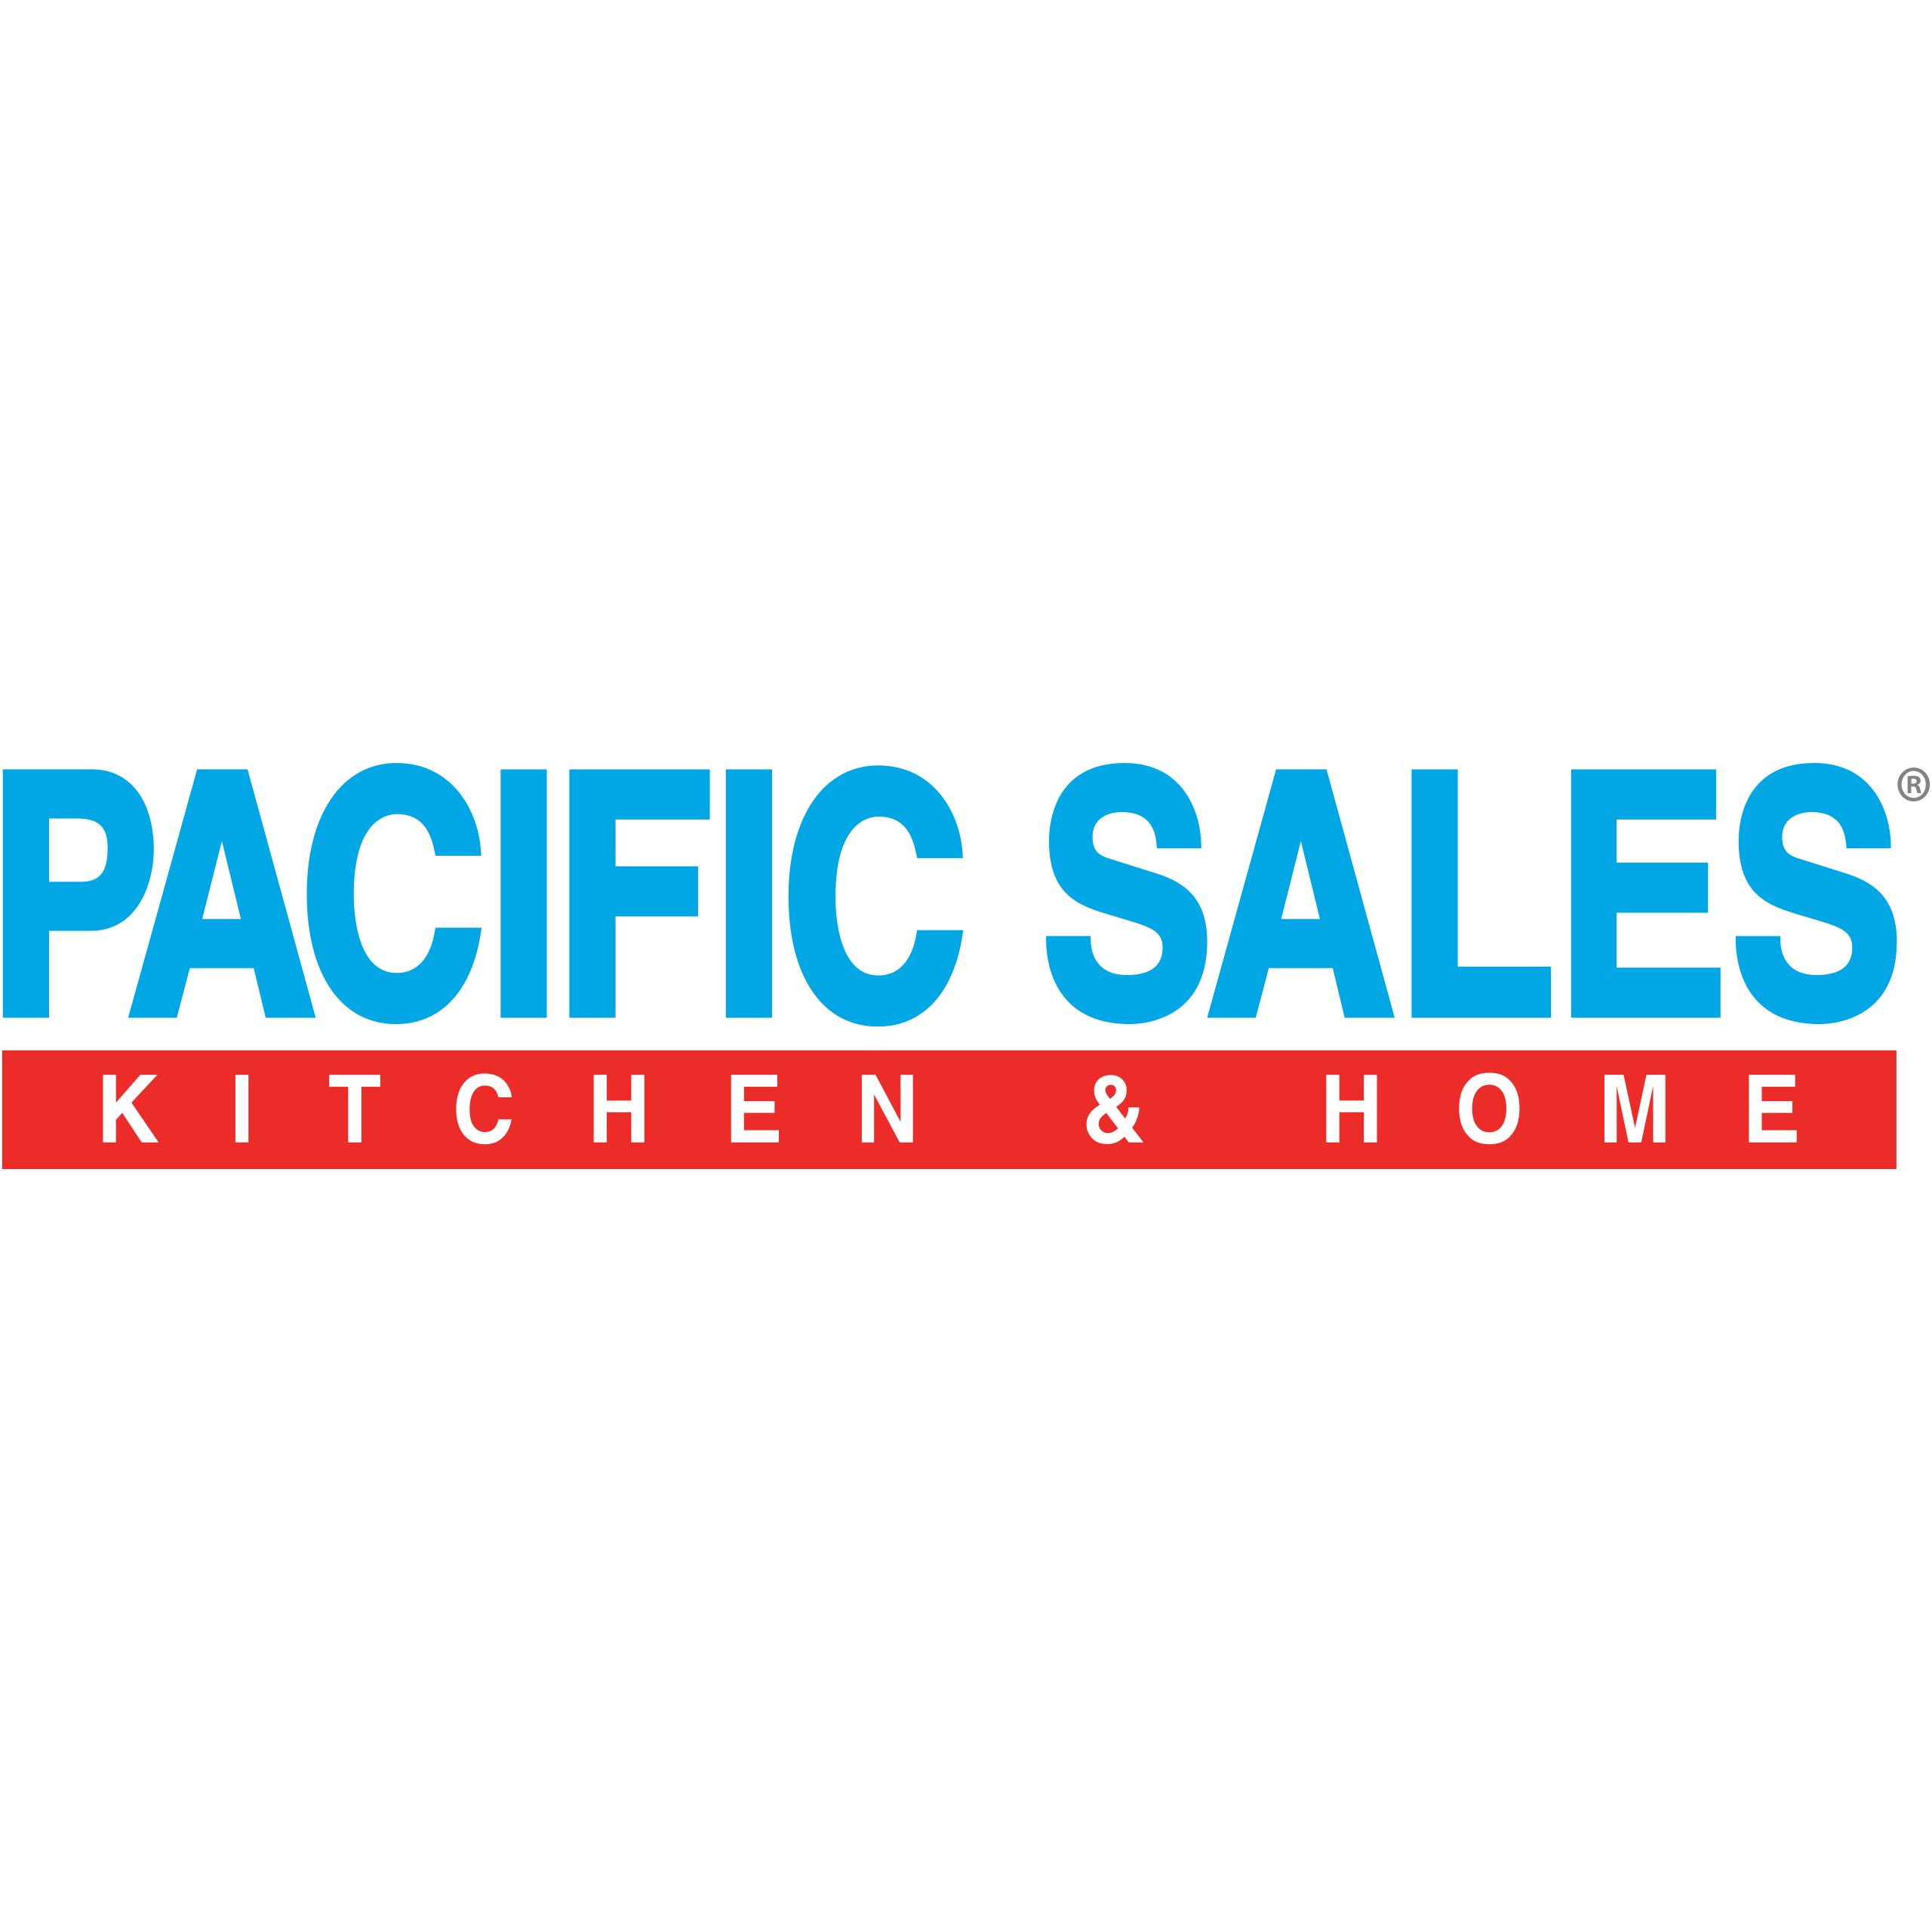 Pacific Sales Kitchen and Home Logo Pacific Sales Kitchen & Home Torrance Torrance (310)784-6100